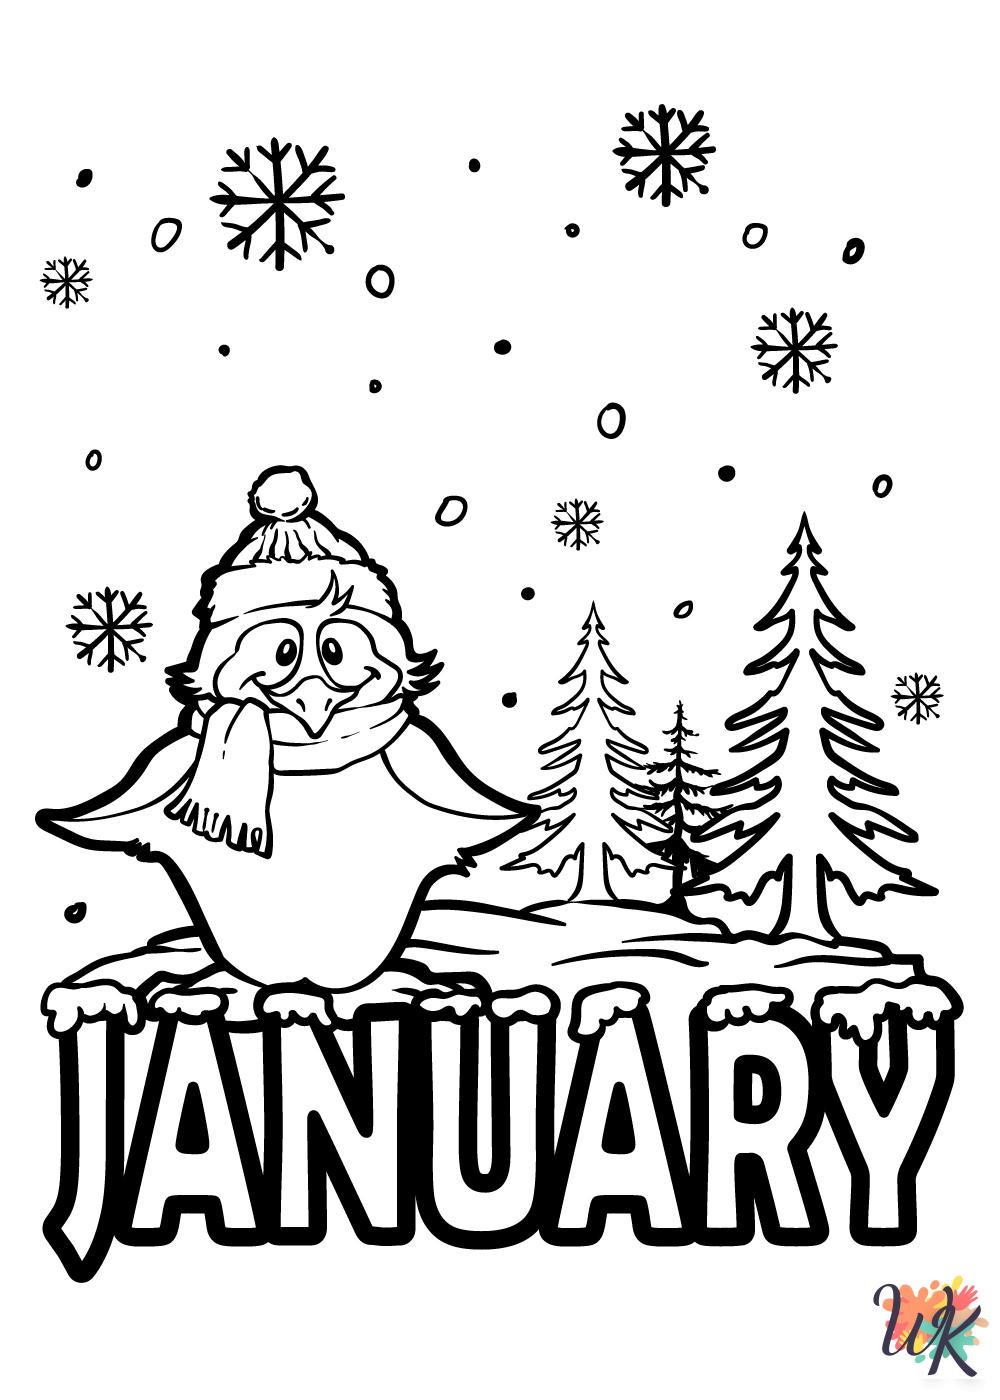 free full size printable January coloring pages for adults pdf